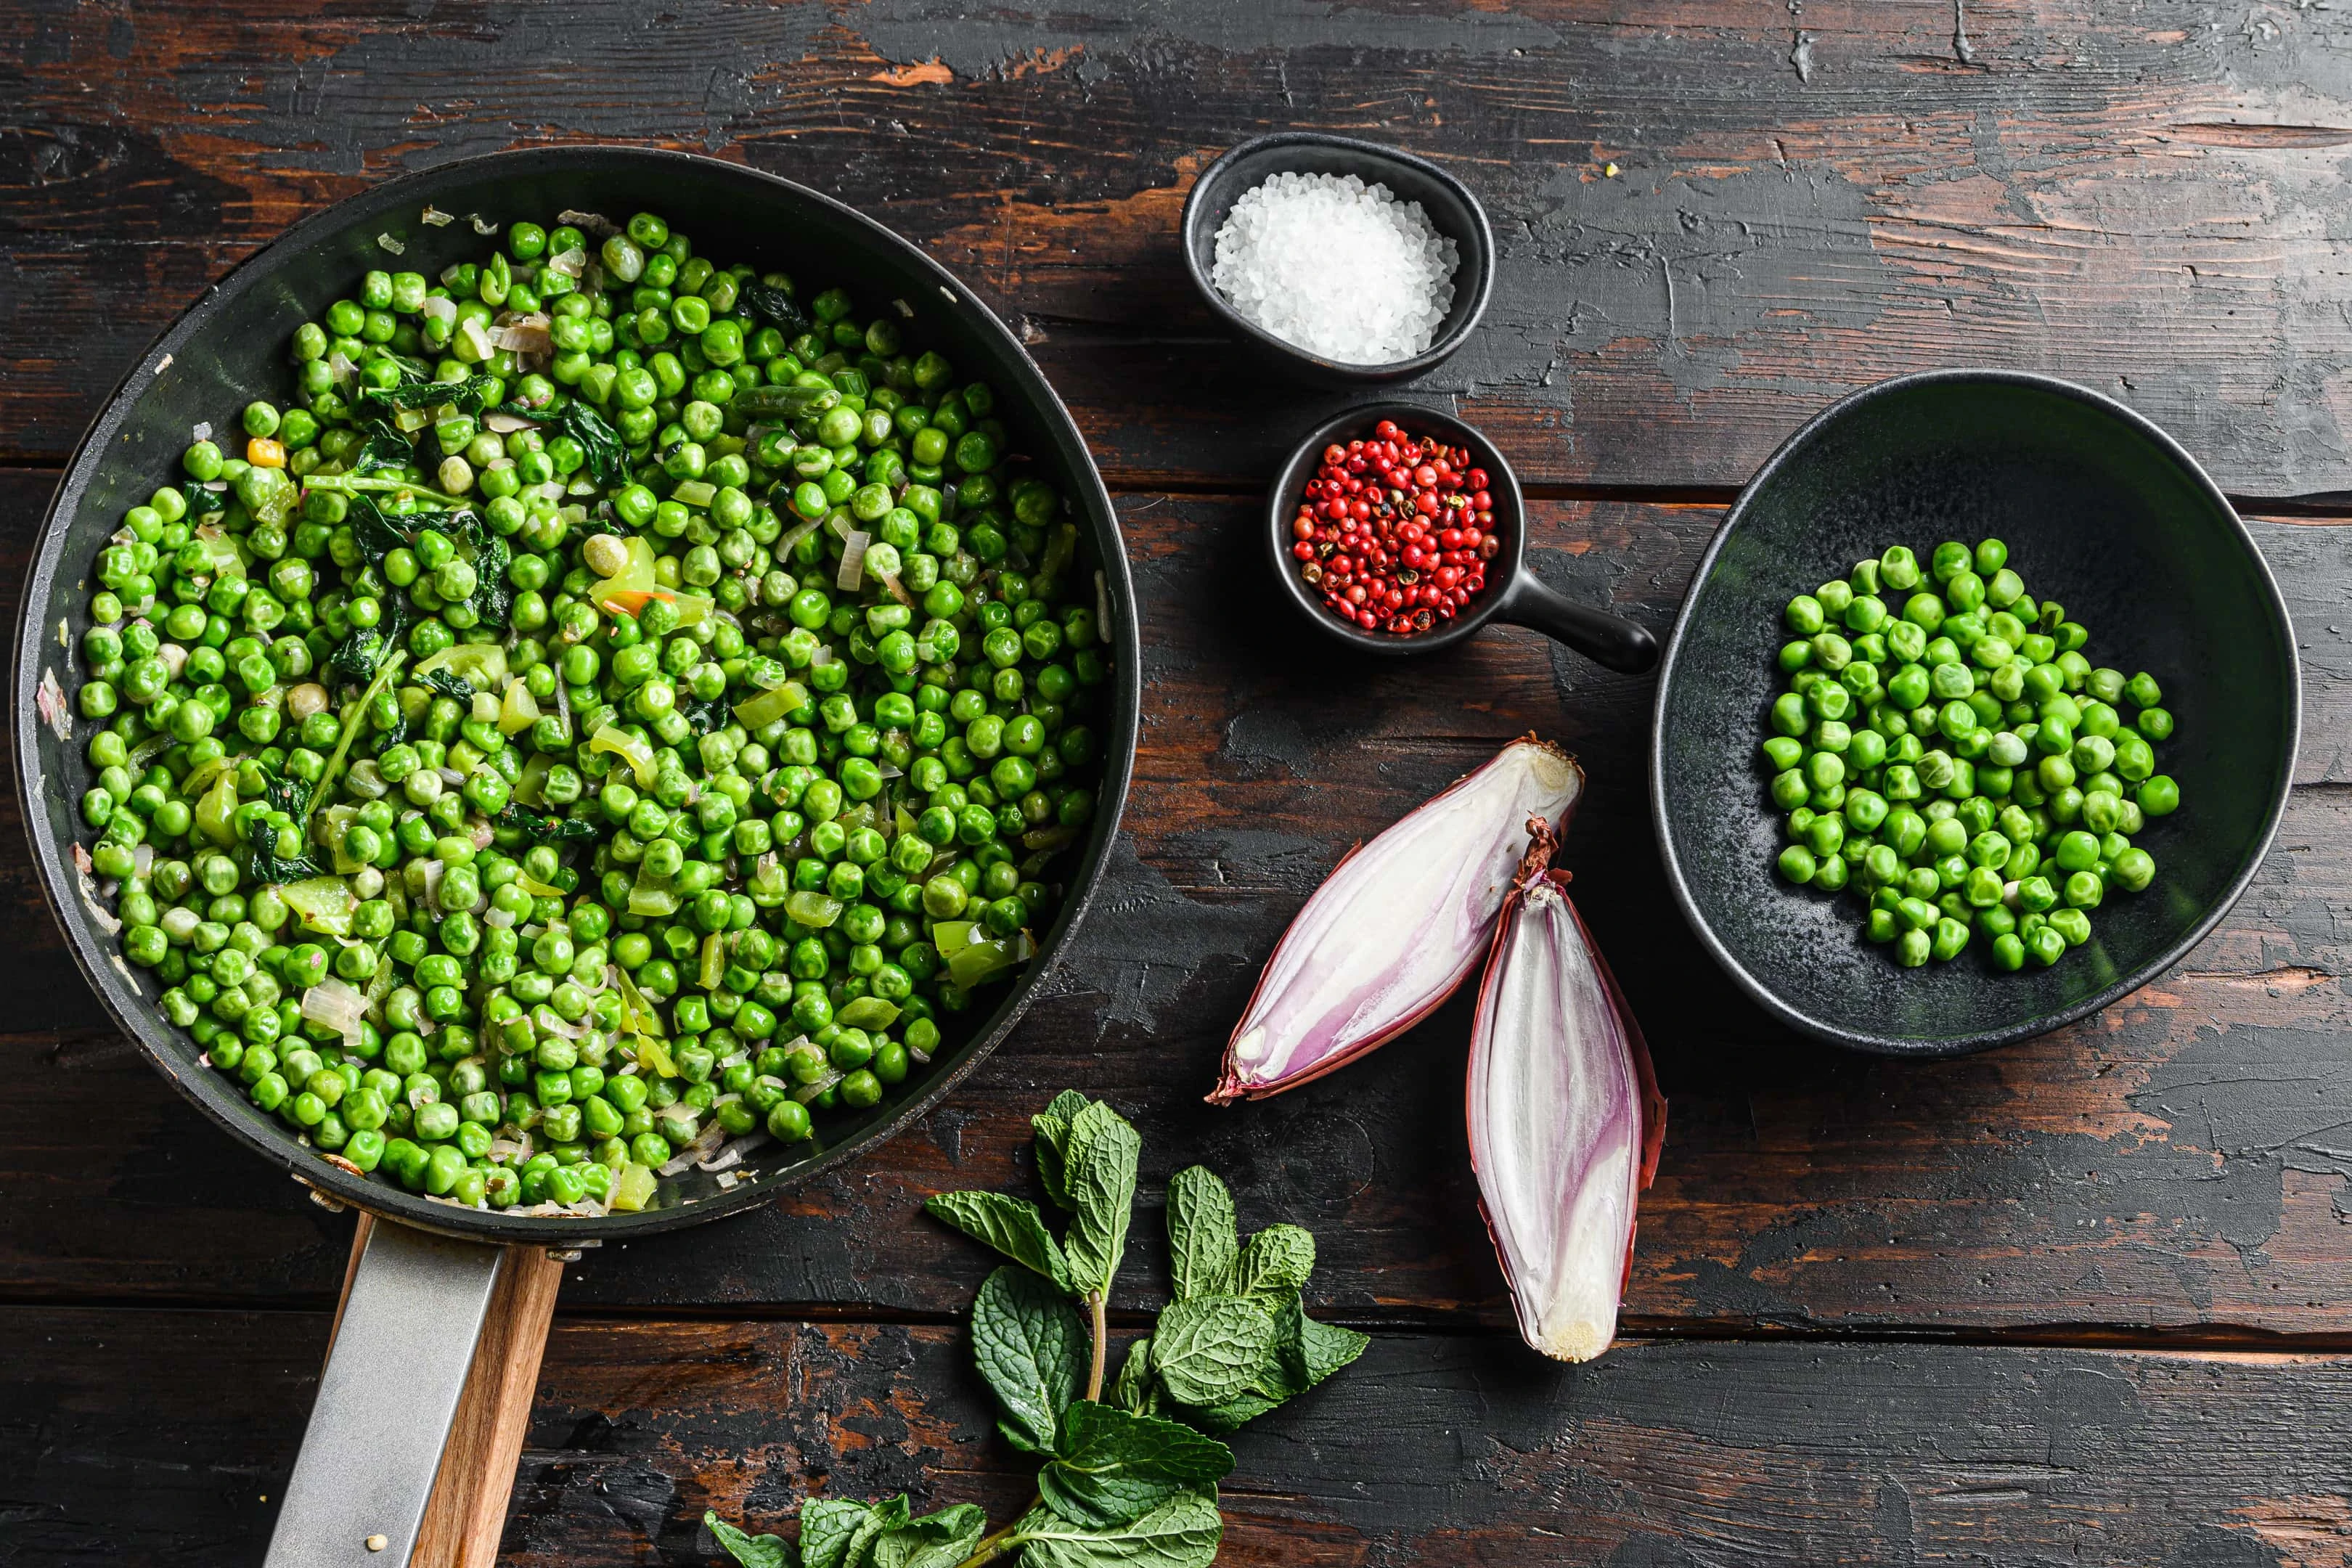 Large pan of cooked peas on wooden table